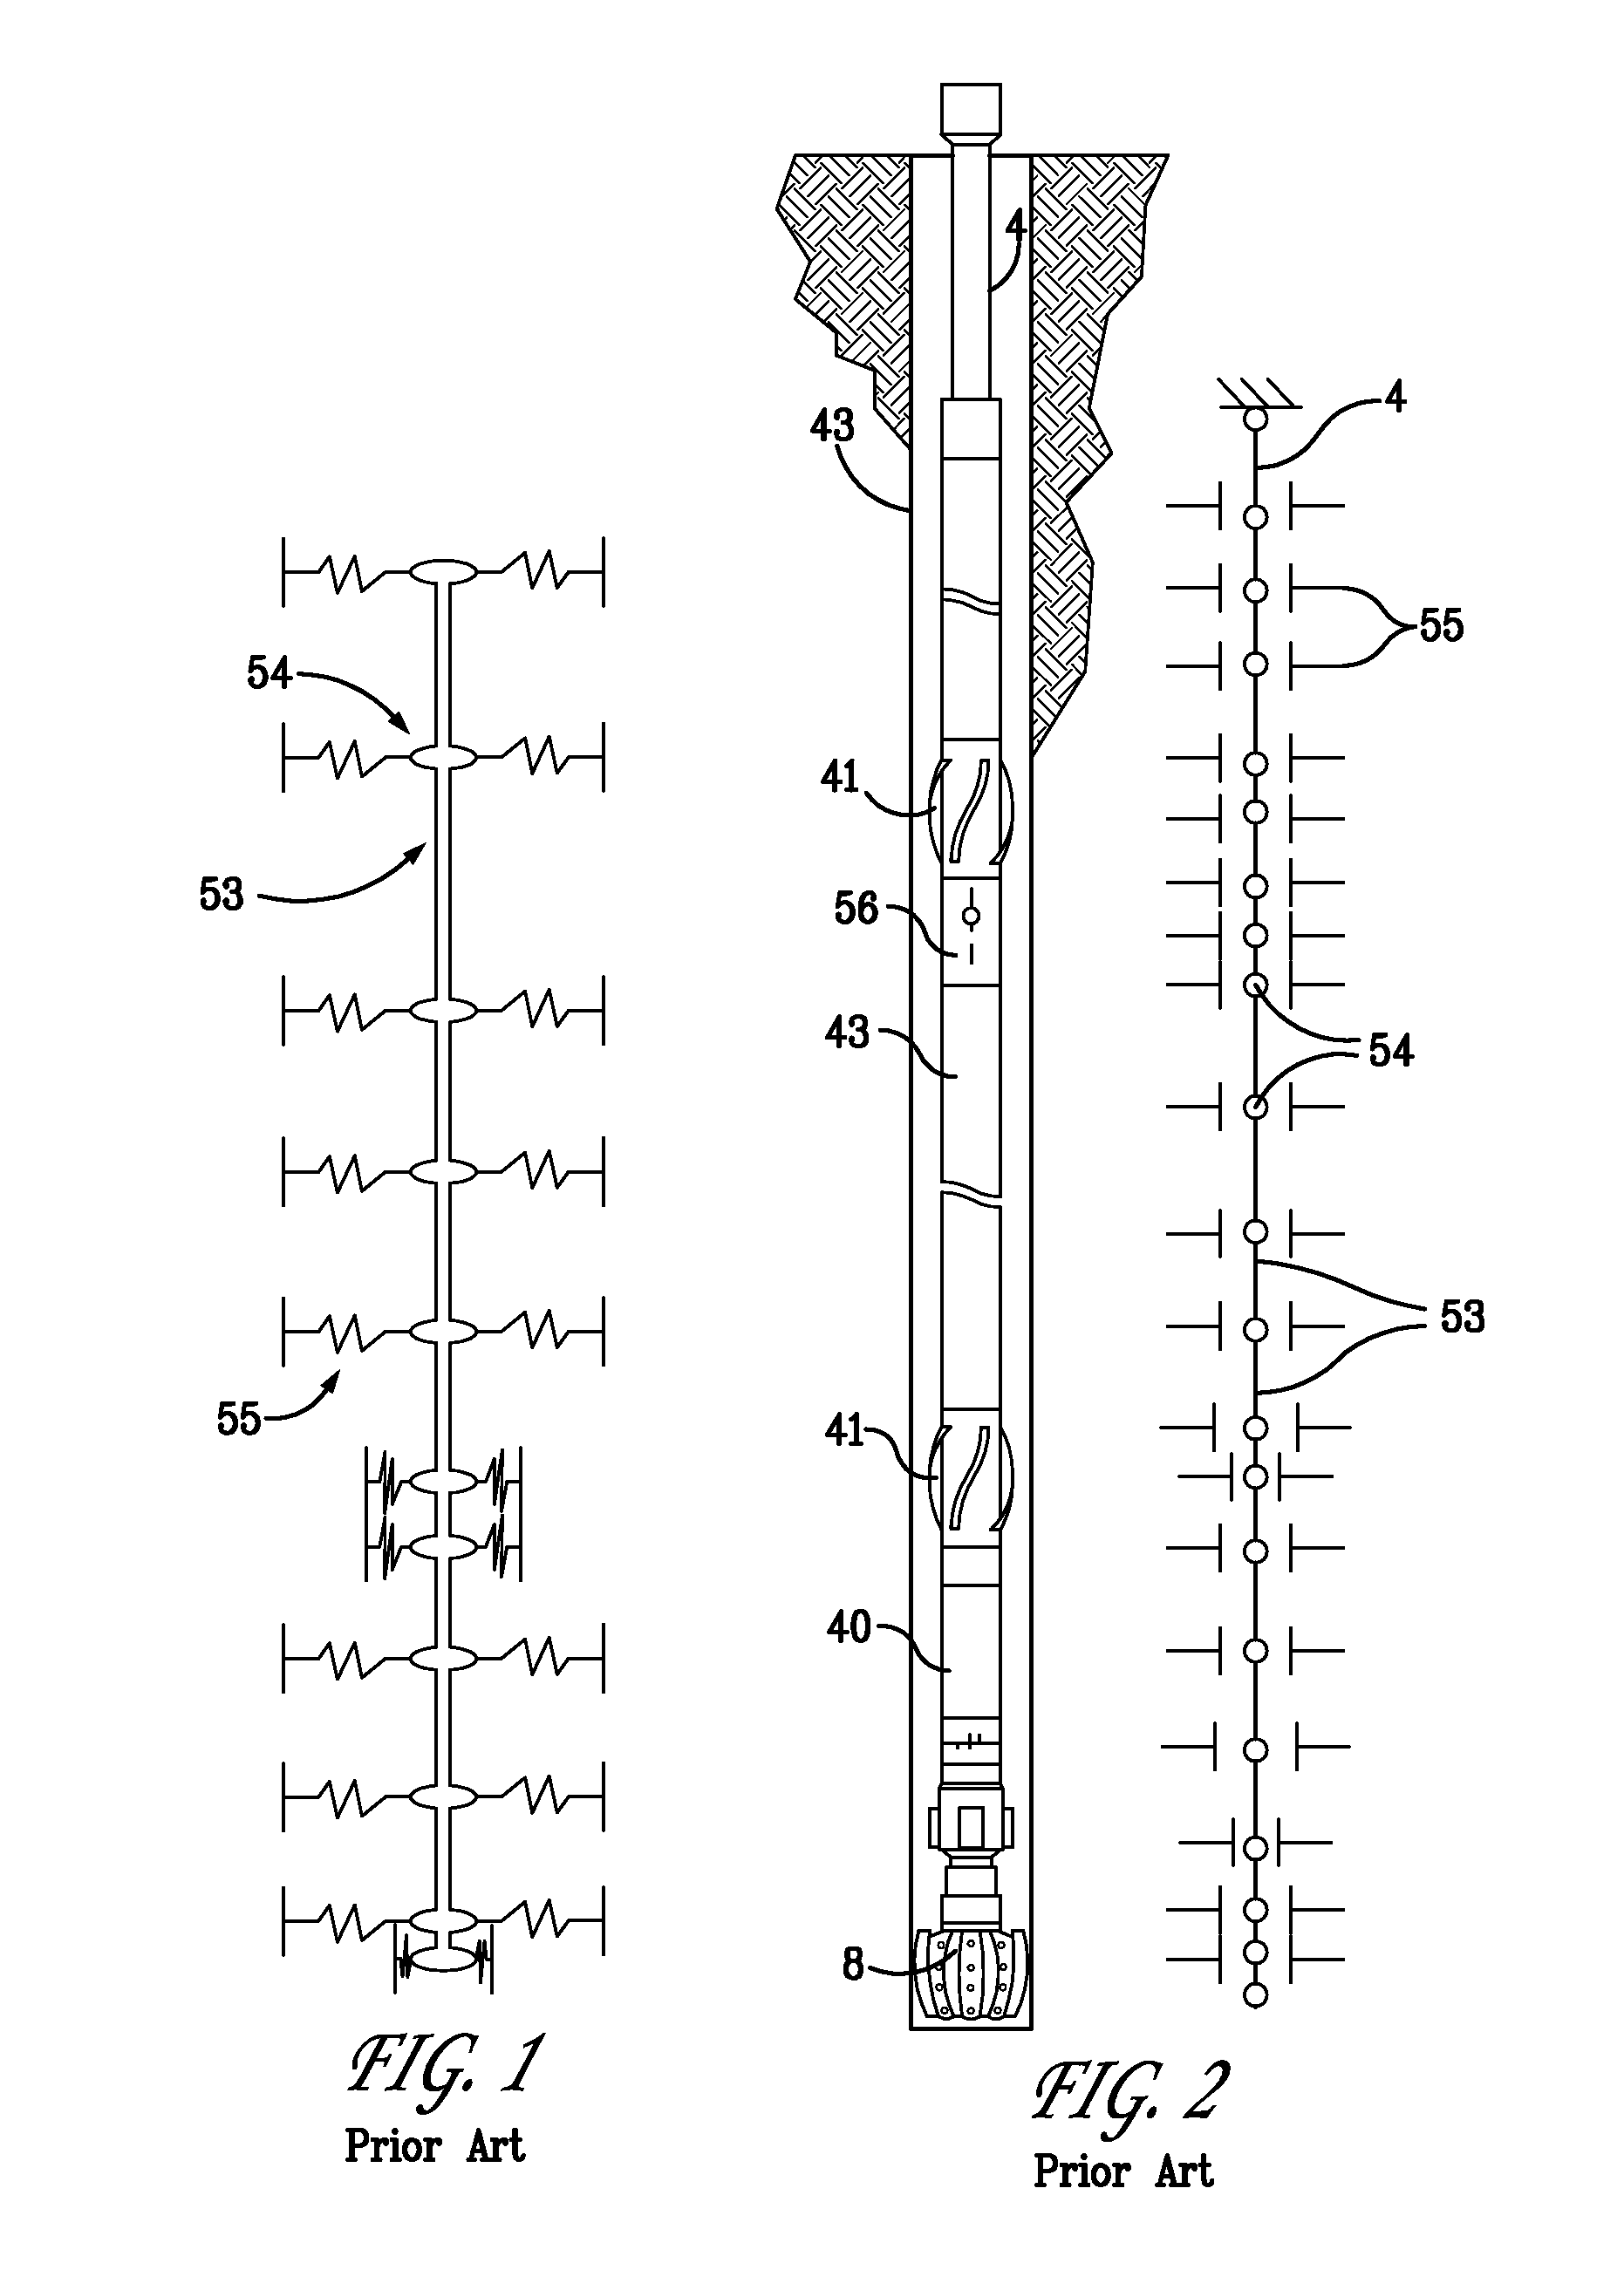 System and Method for Monitoring and Controlling Underground Drilling